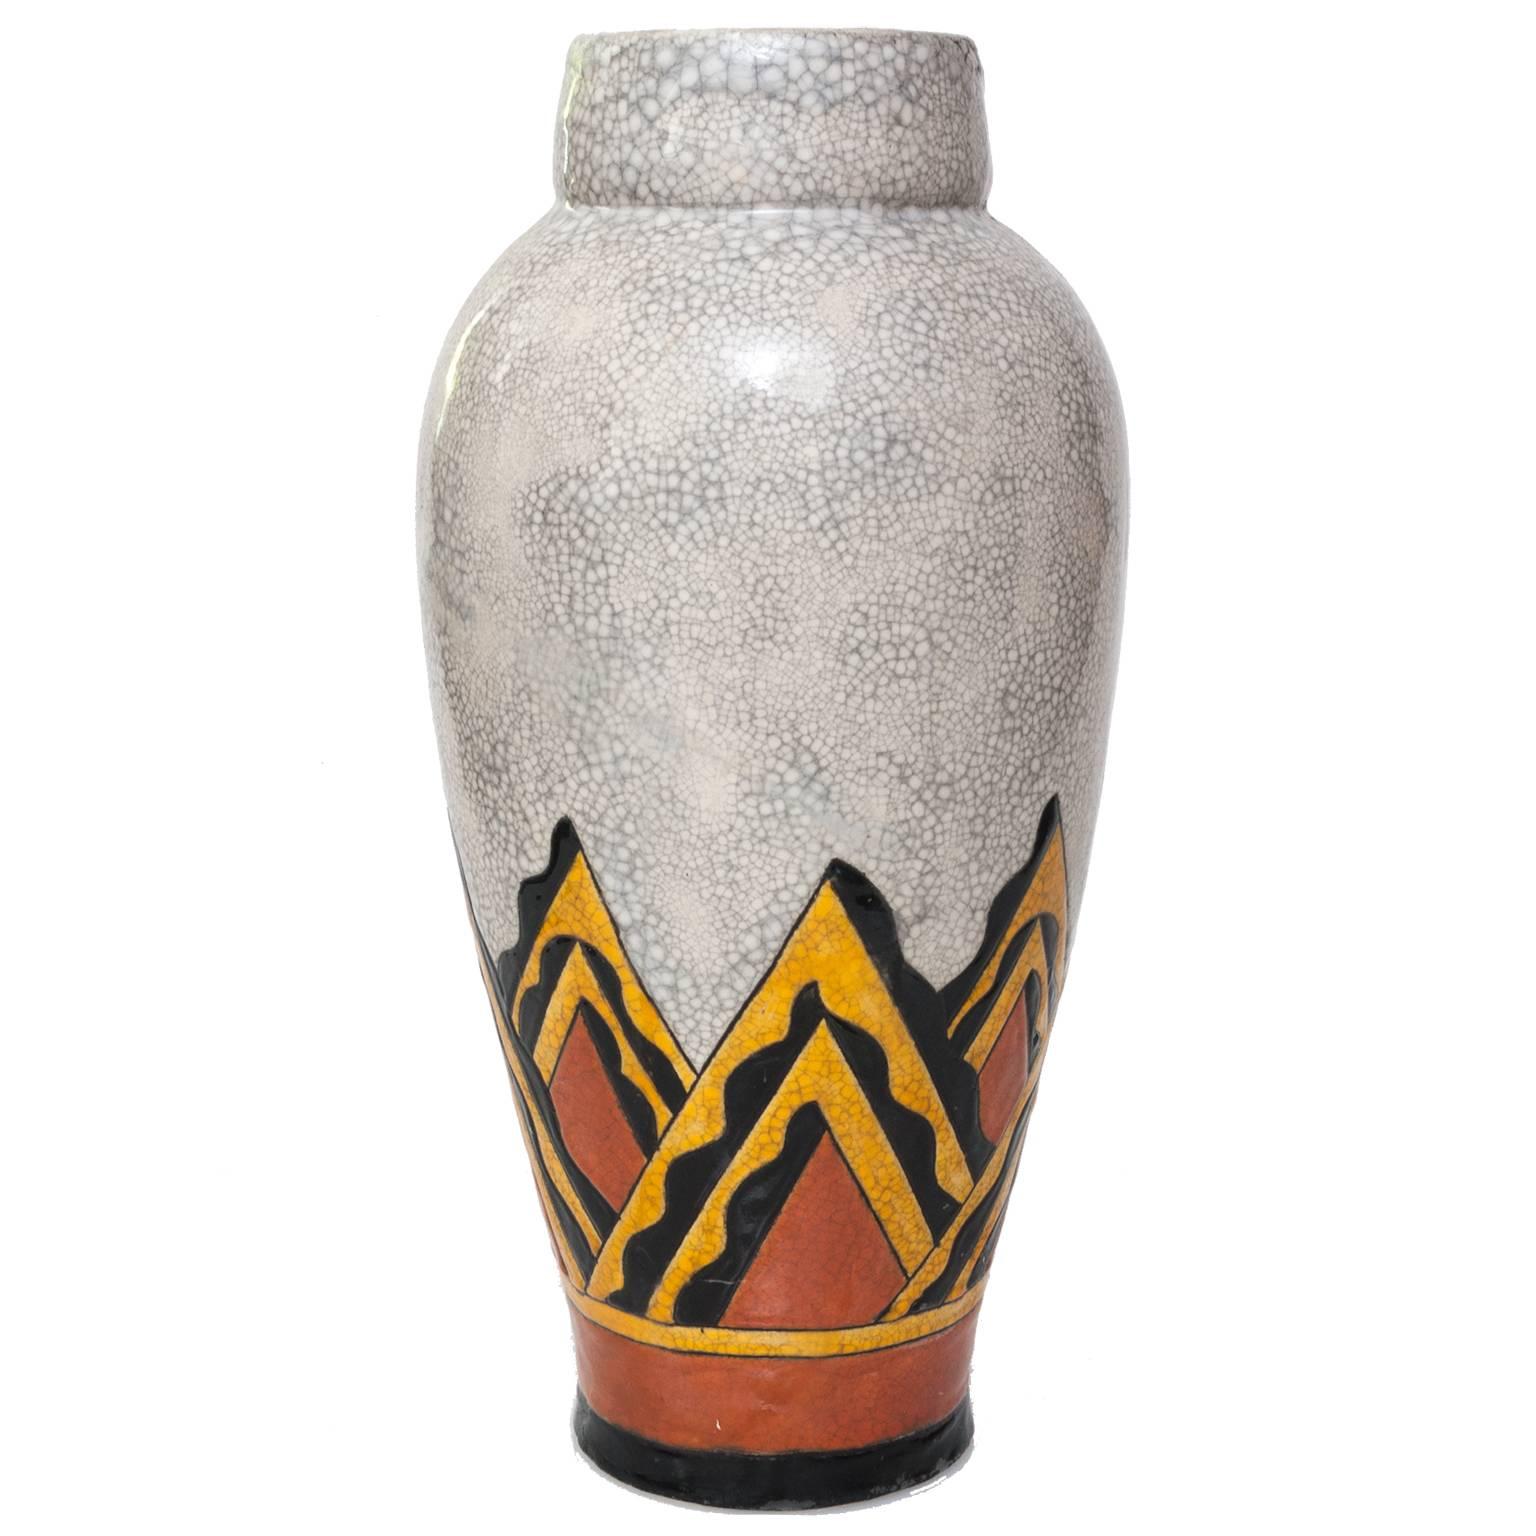 Art Deco Ceramic Vase by Charles Catteau for Boch Freres, Belgium